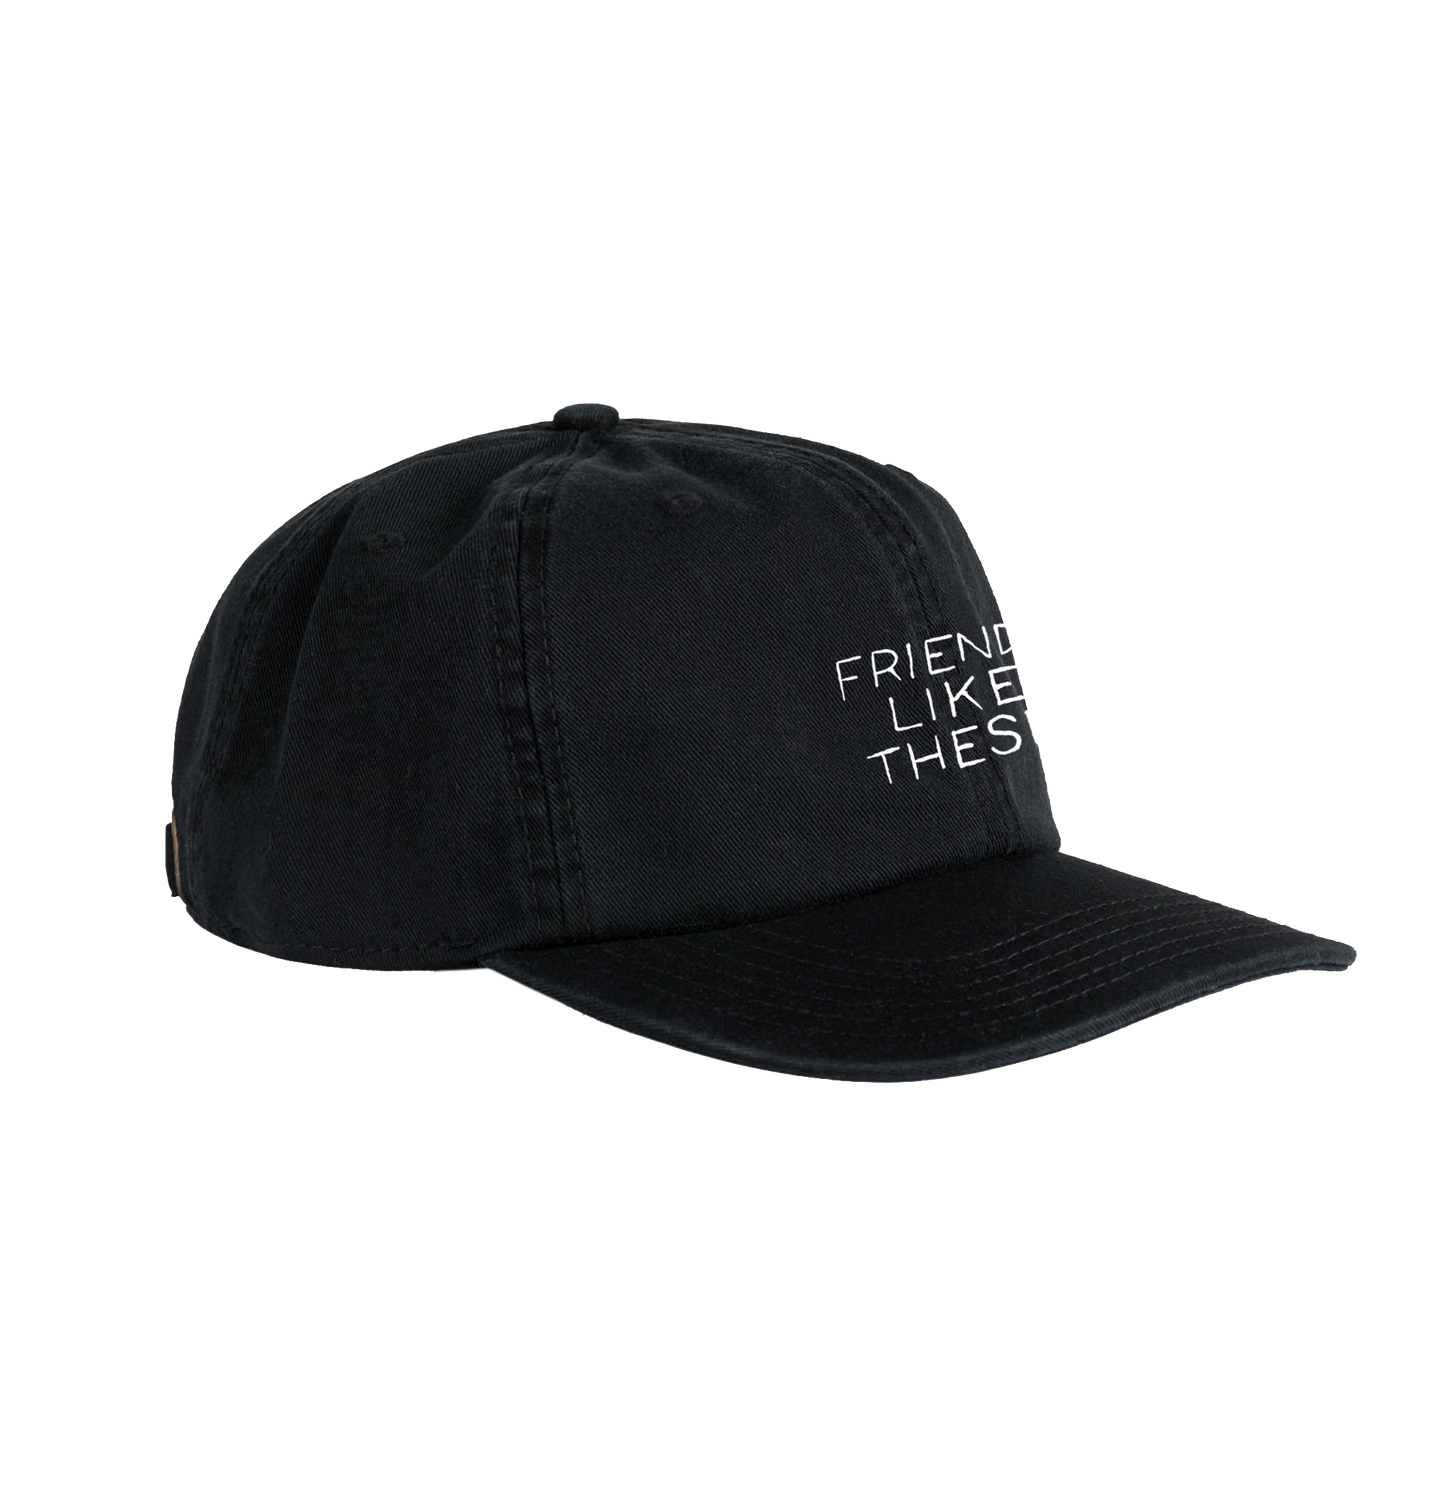 'Friends Like These' Cap